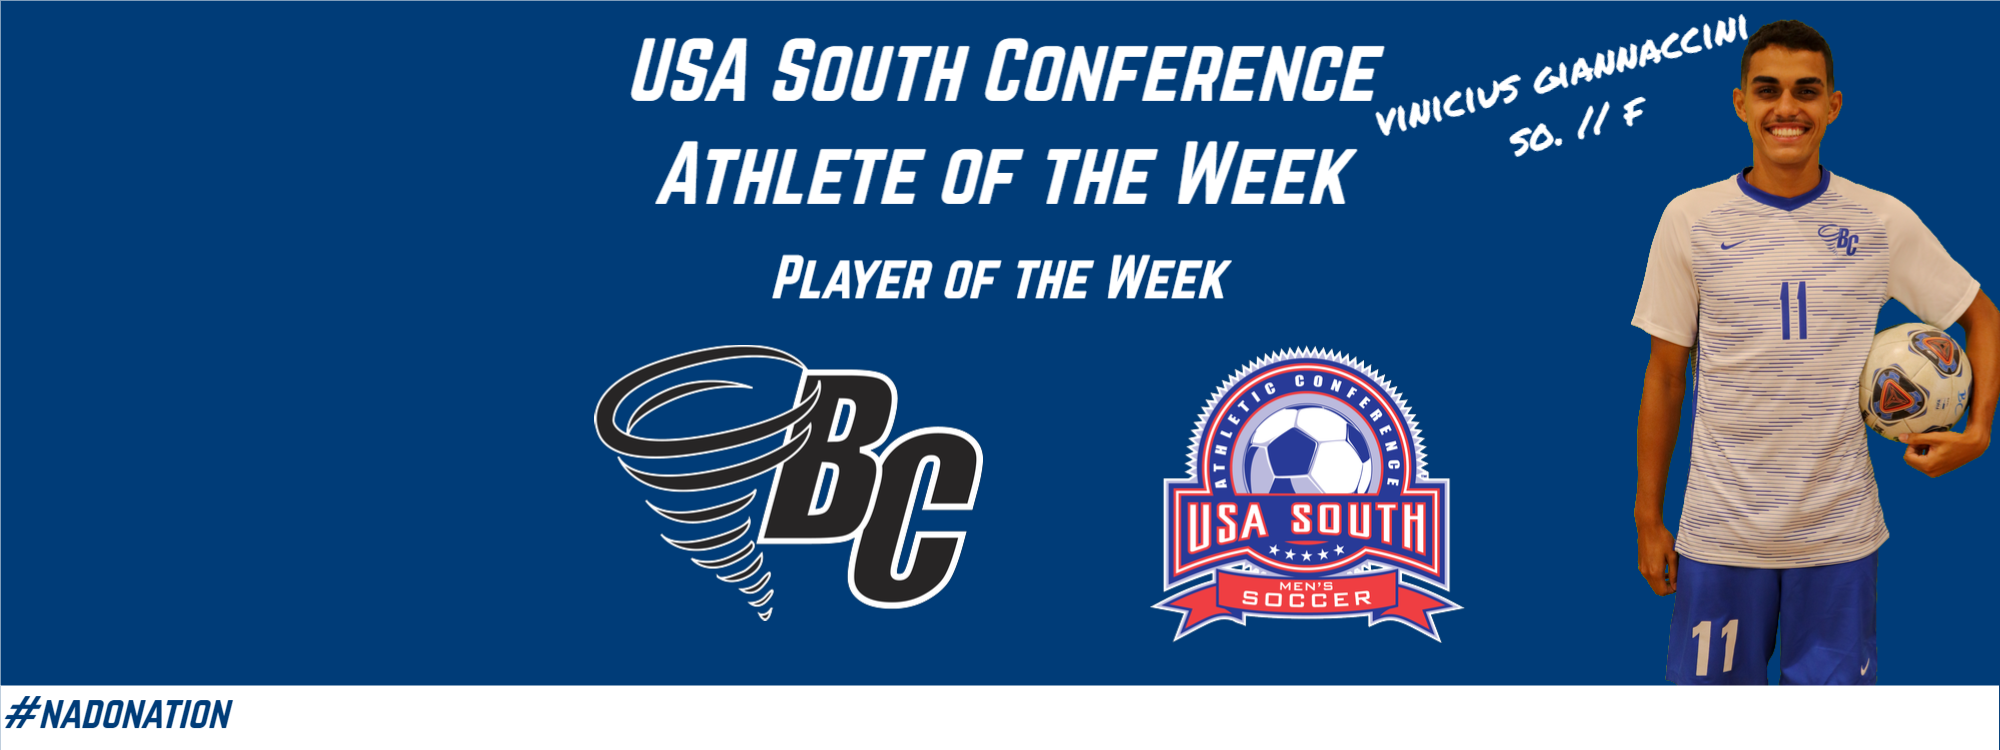 Giannaccini Earns Player of the Week Honor from USA South